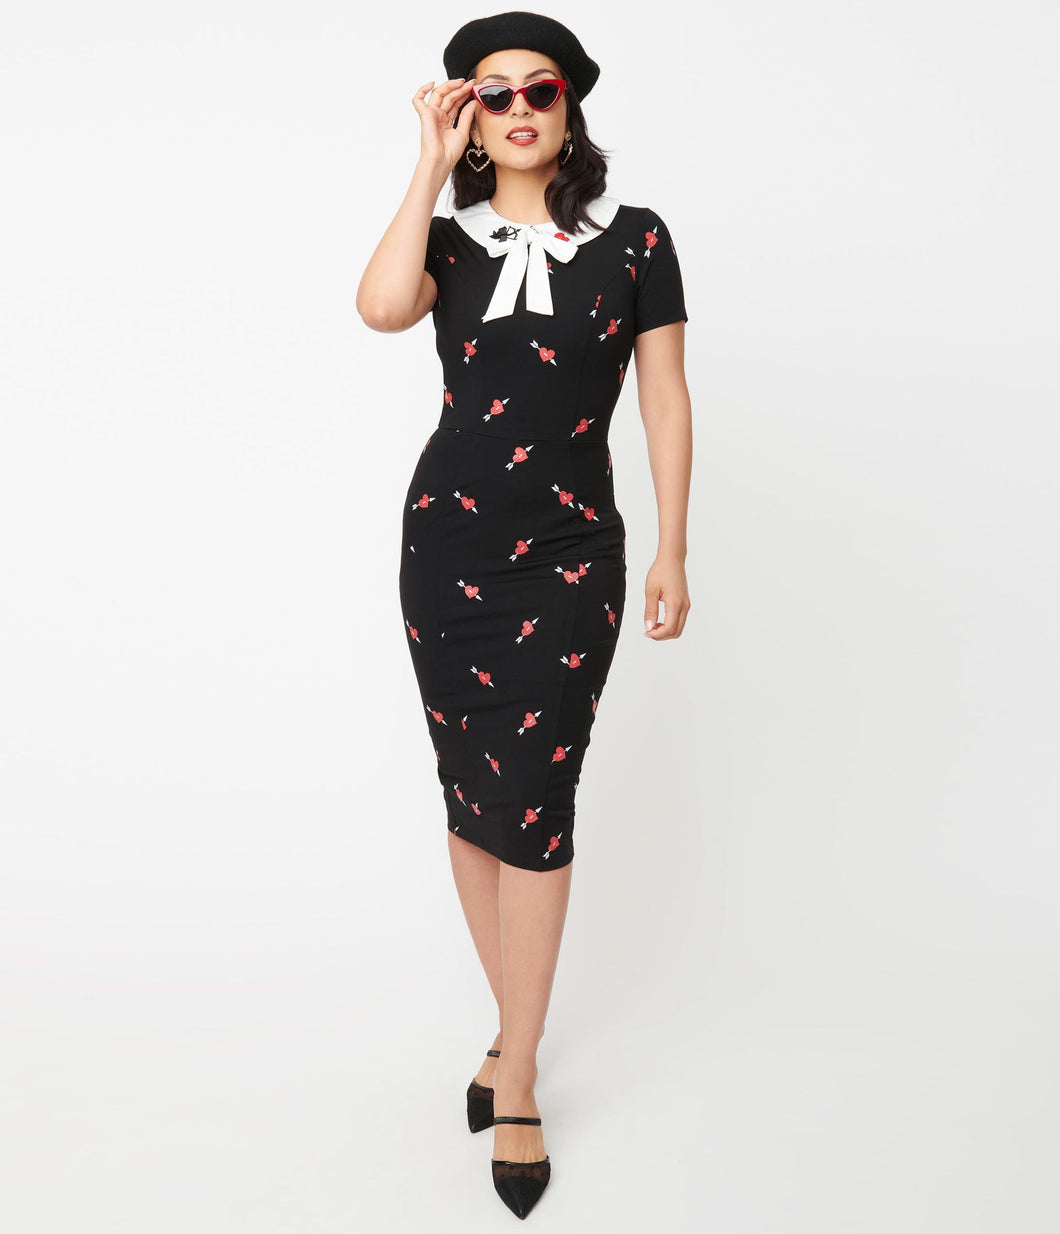 Unique Vintage Renata Black & Pierced Heart Pencil Dress retro vintage pinup 40s 50s wiggle dress in valentines theme heart print with peter pan collar Canadian Pin-Up Shop Suzie's Bombshell Boutique